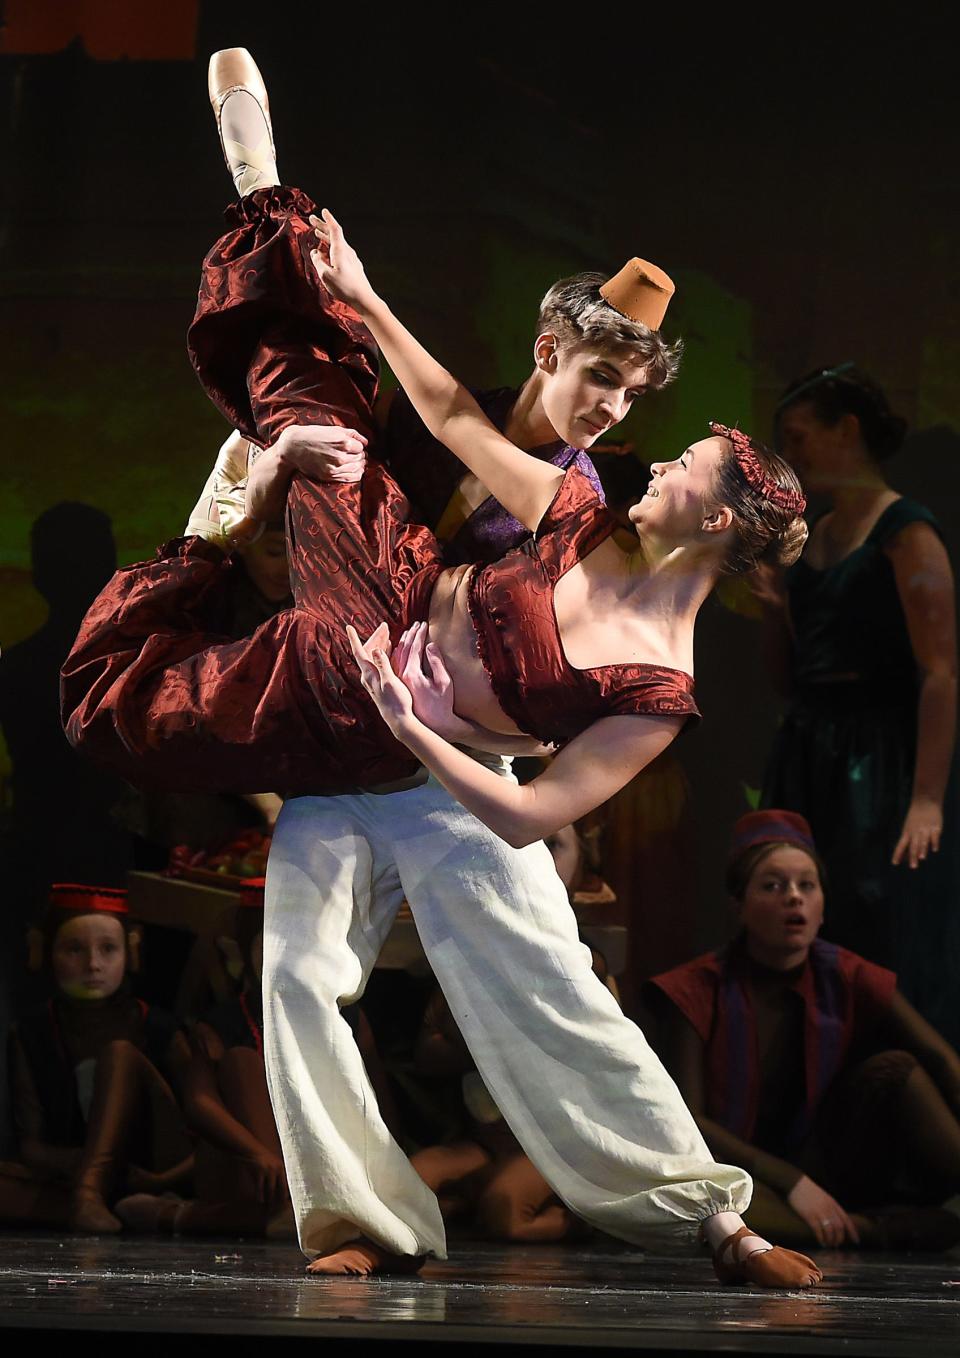 Nathan Glover as Aladdin lifts Emily Bellino as Jasmine in the marketplace scene in the first act of Aladdin.